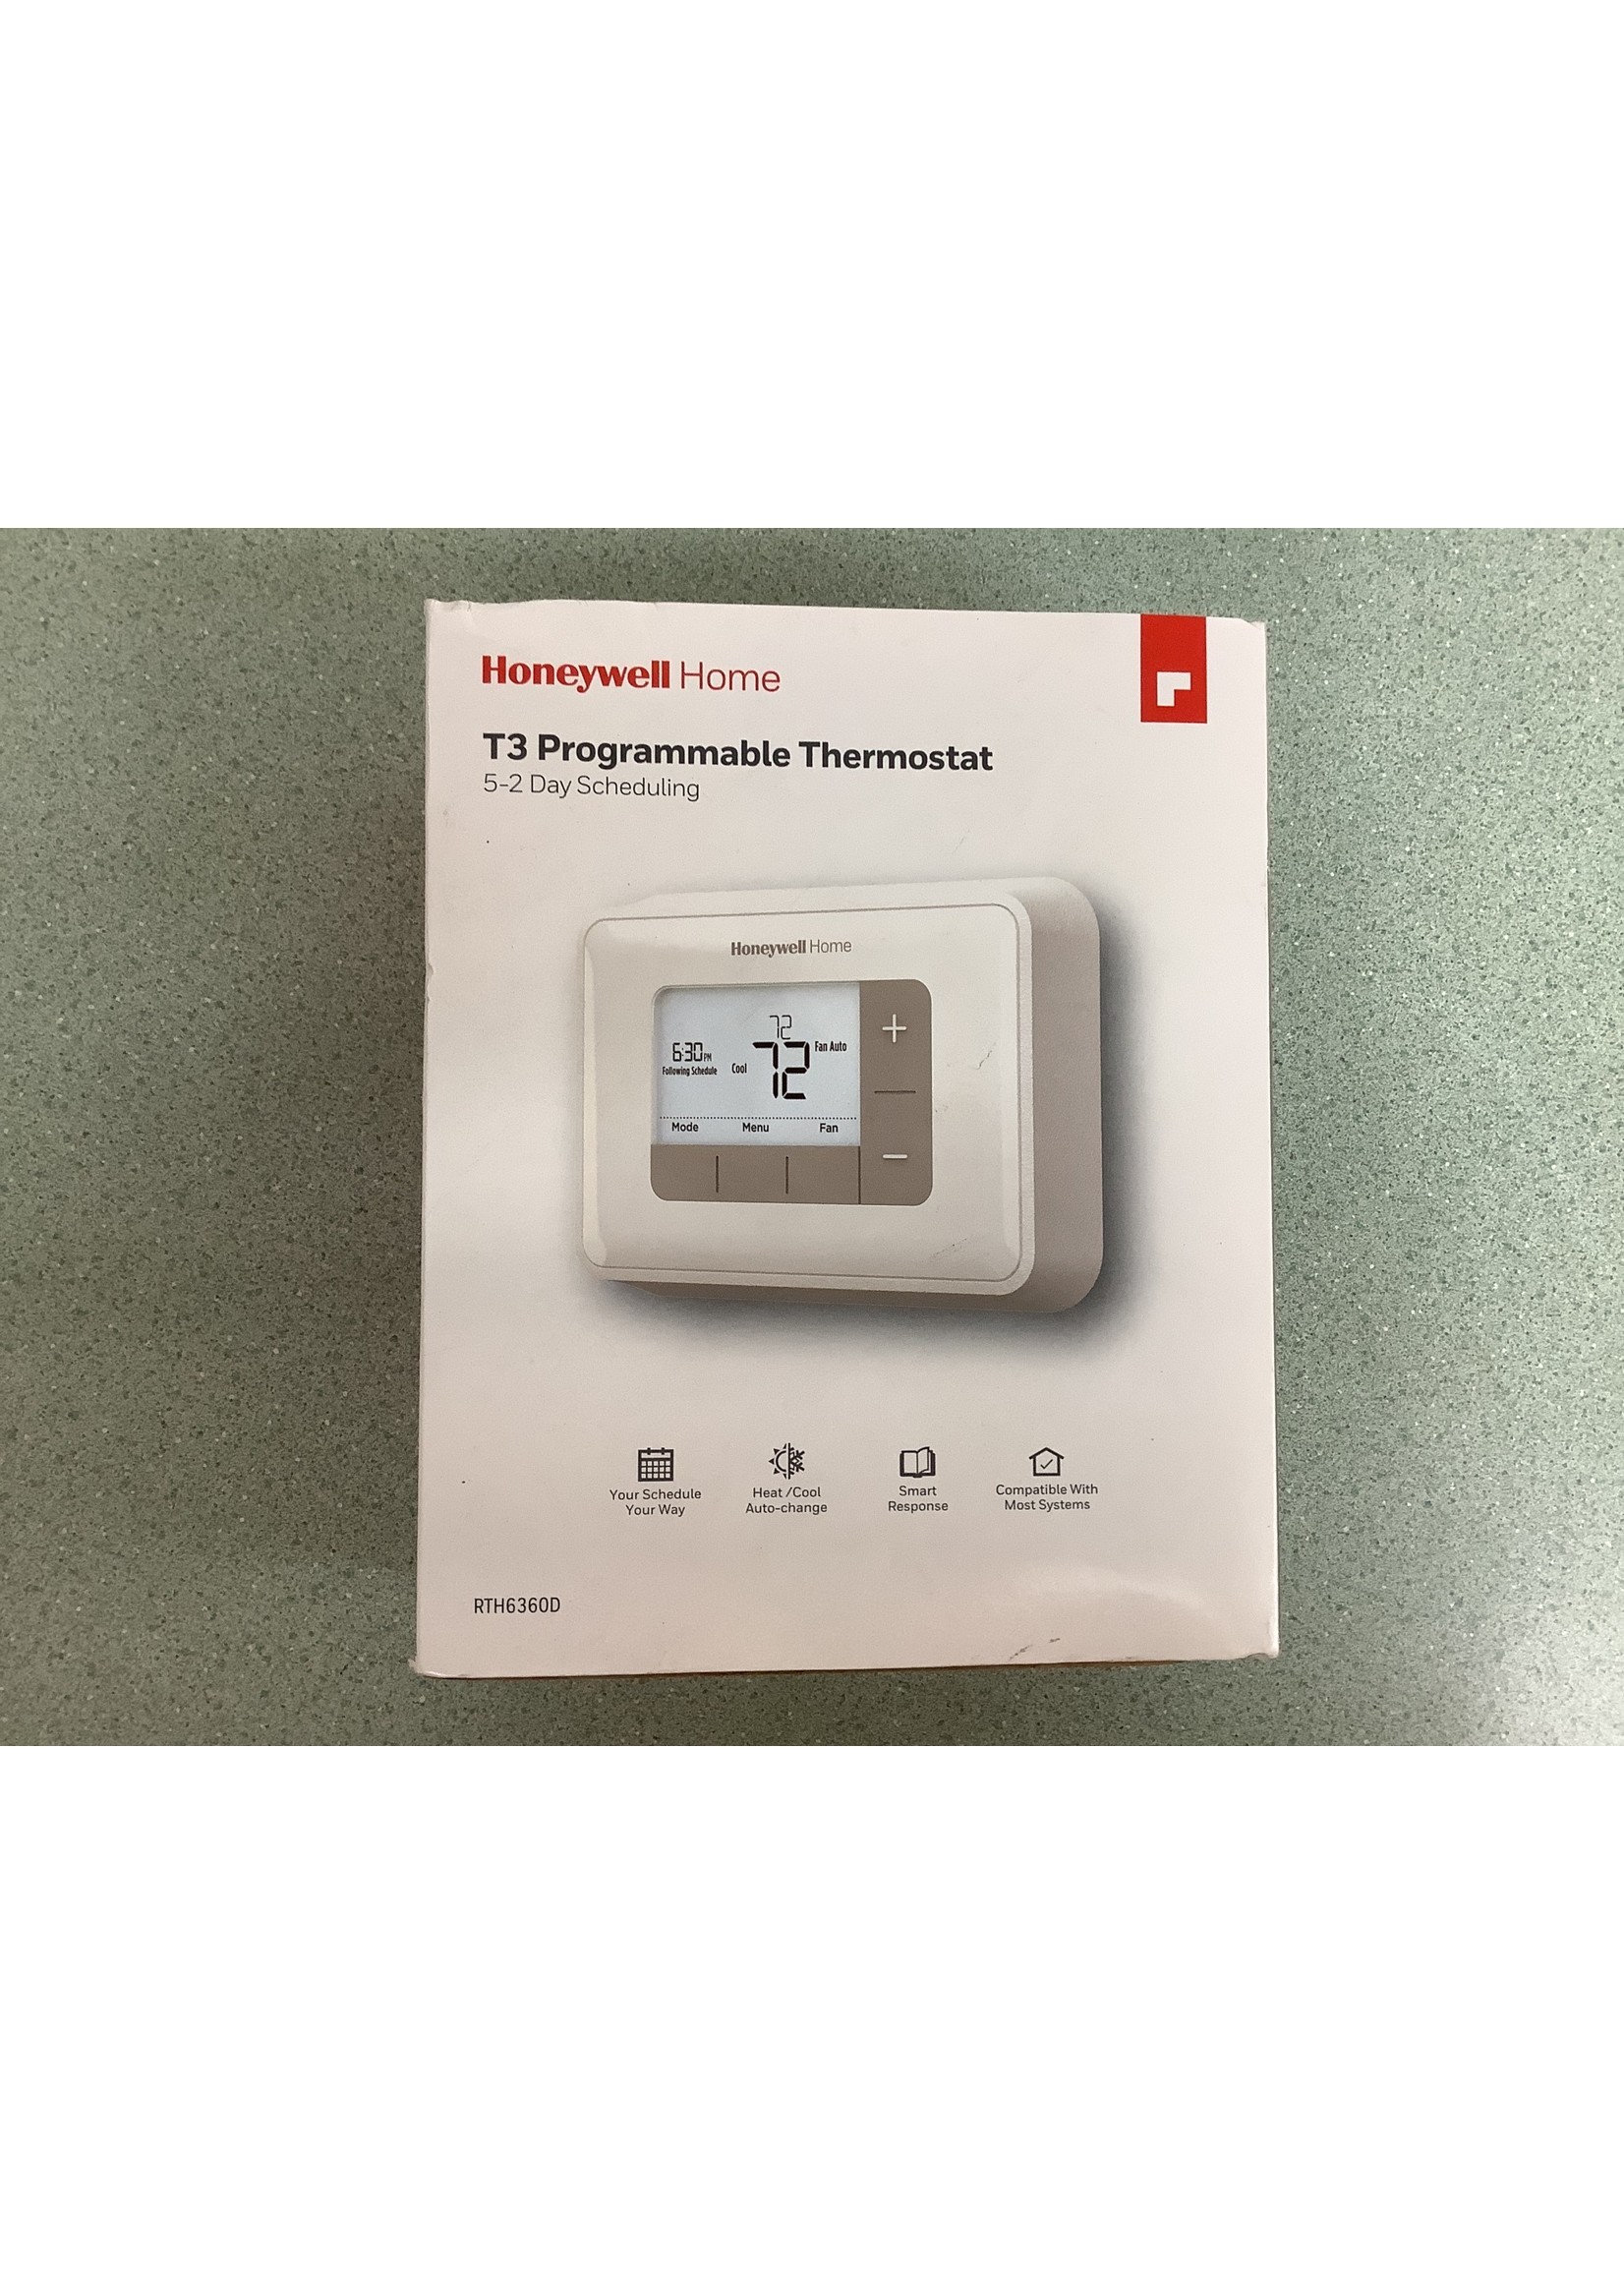 Honeywell home T3 programmable thermostat